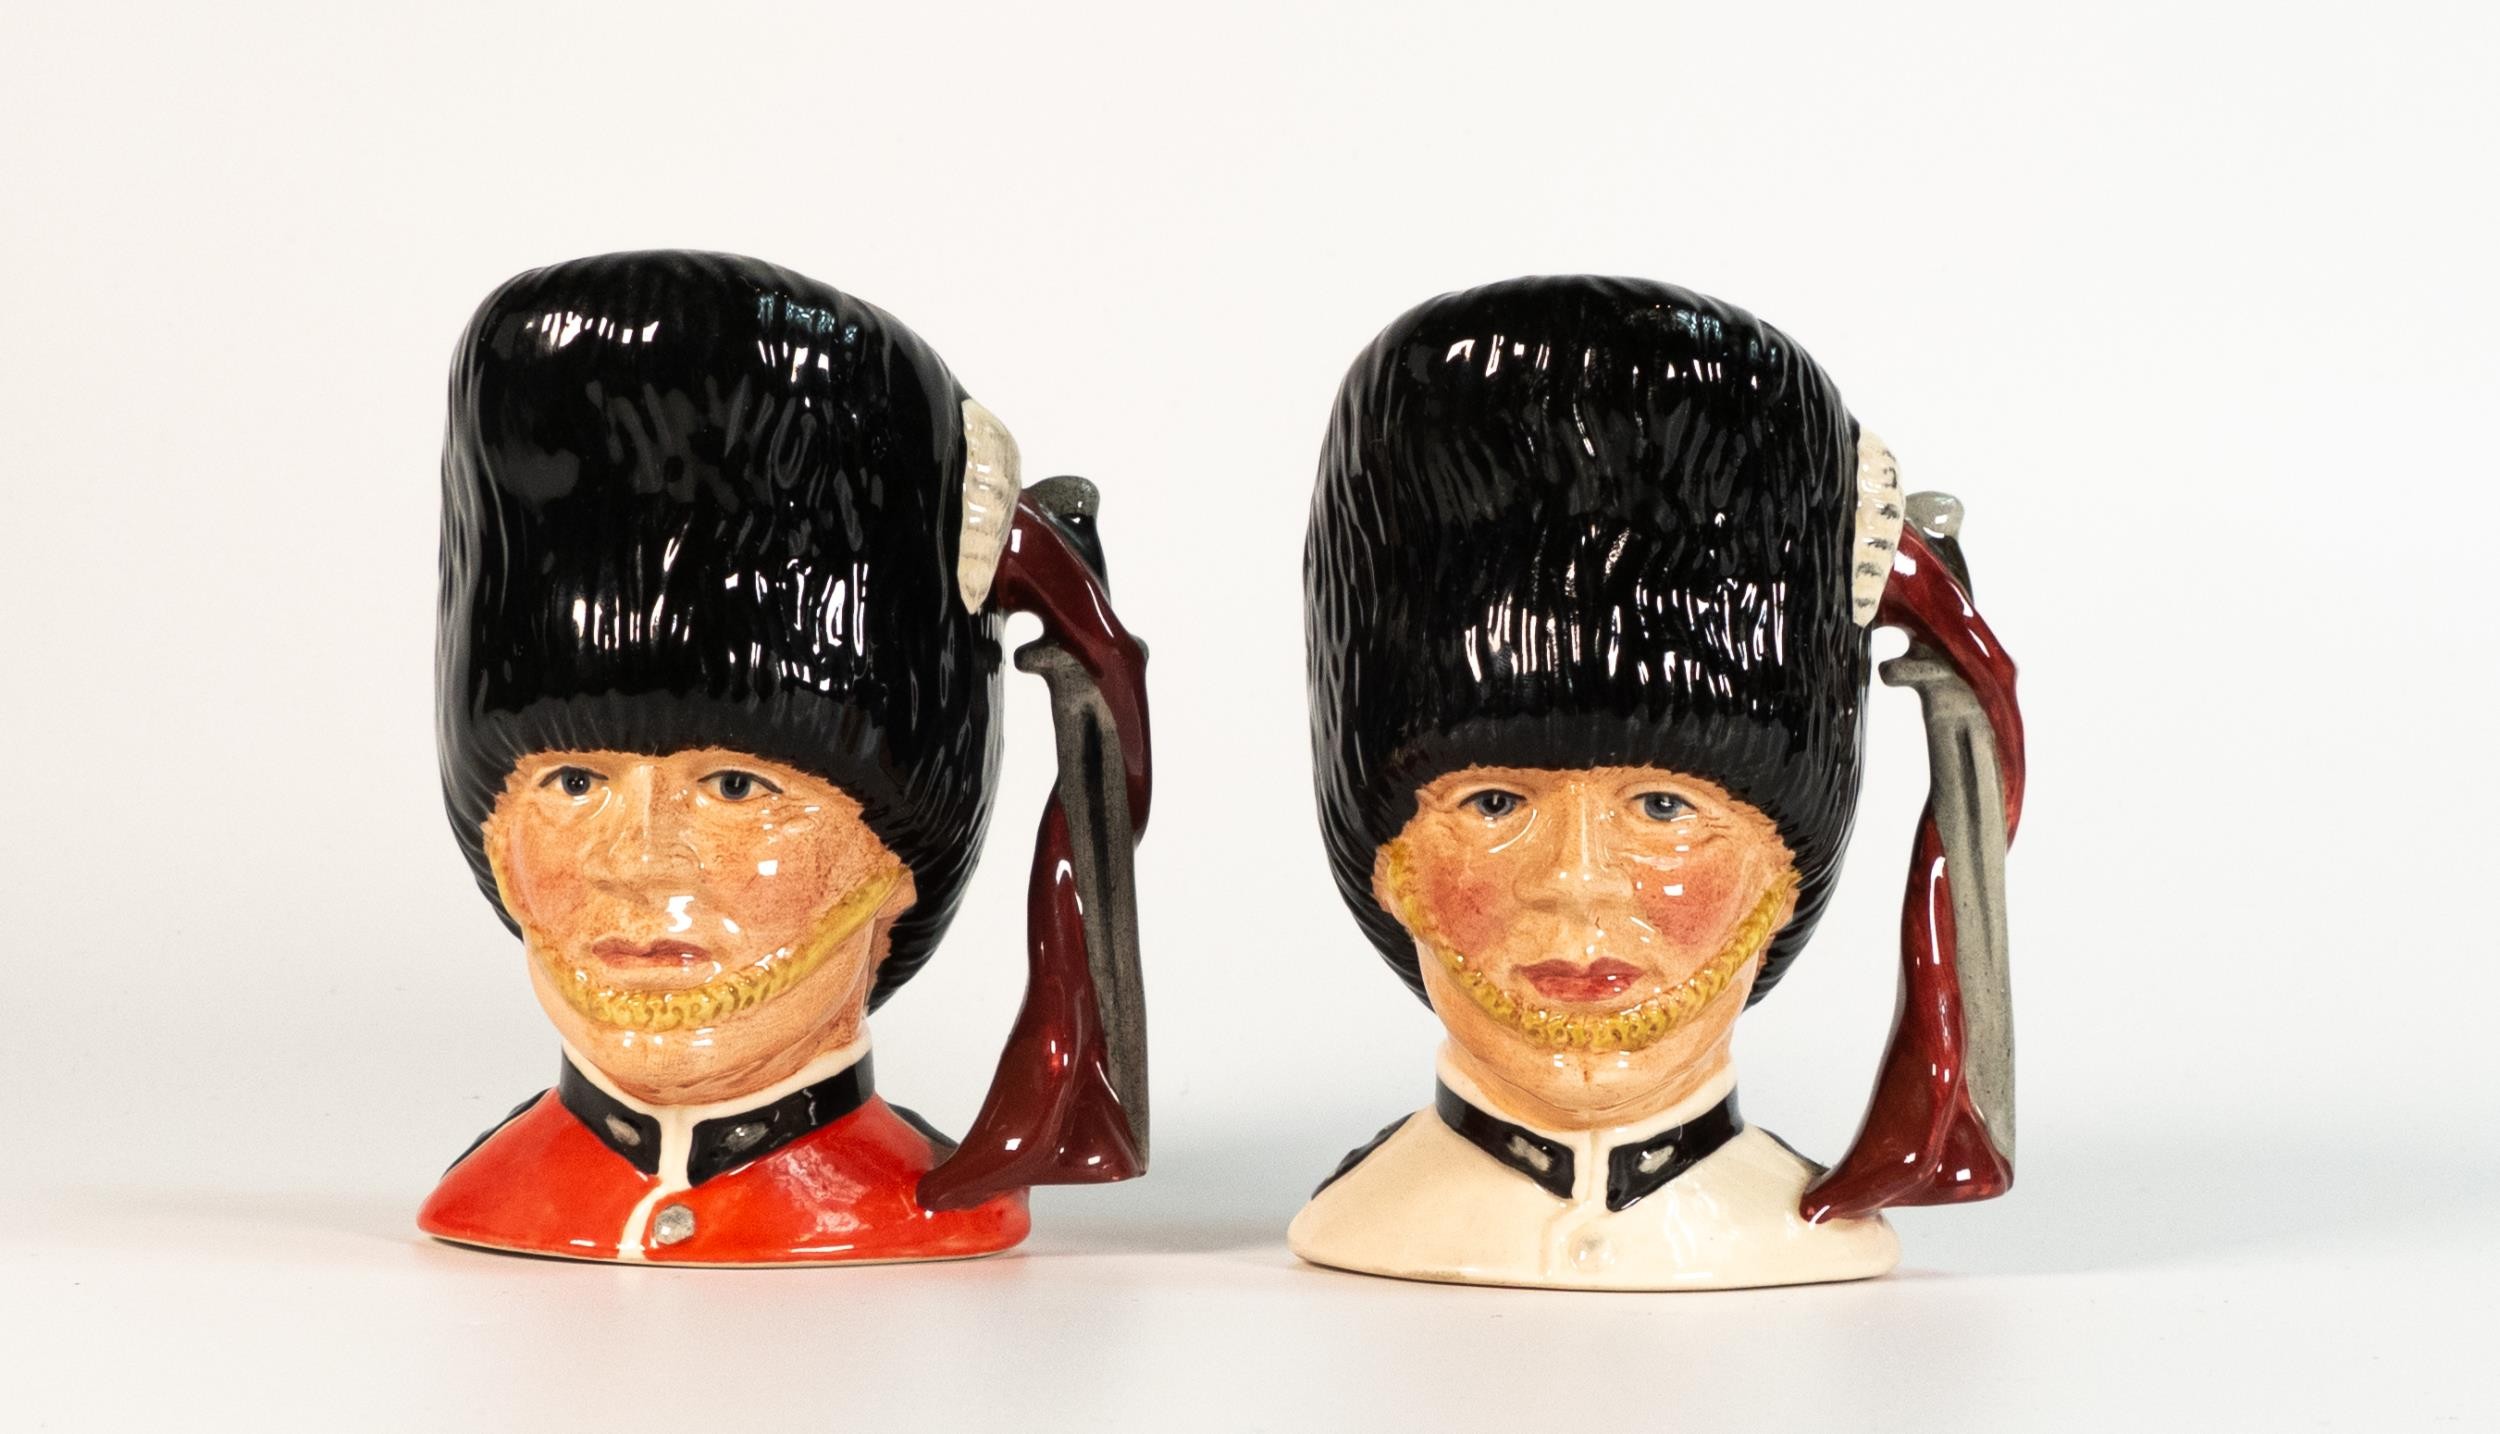 Royal Doulton small character jugs The Guardsman D6771 in two colour ways (2)